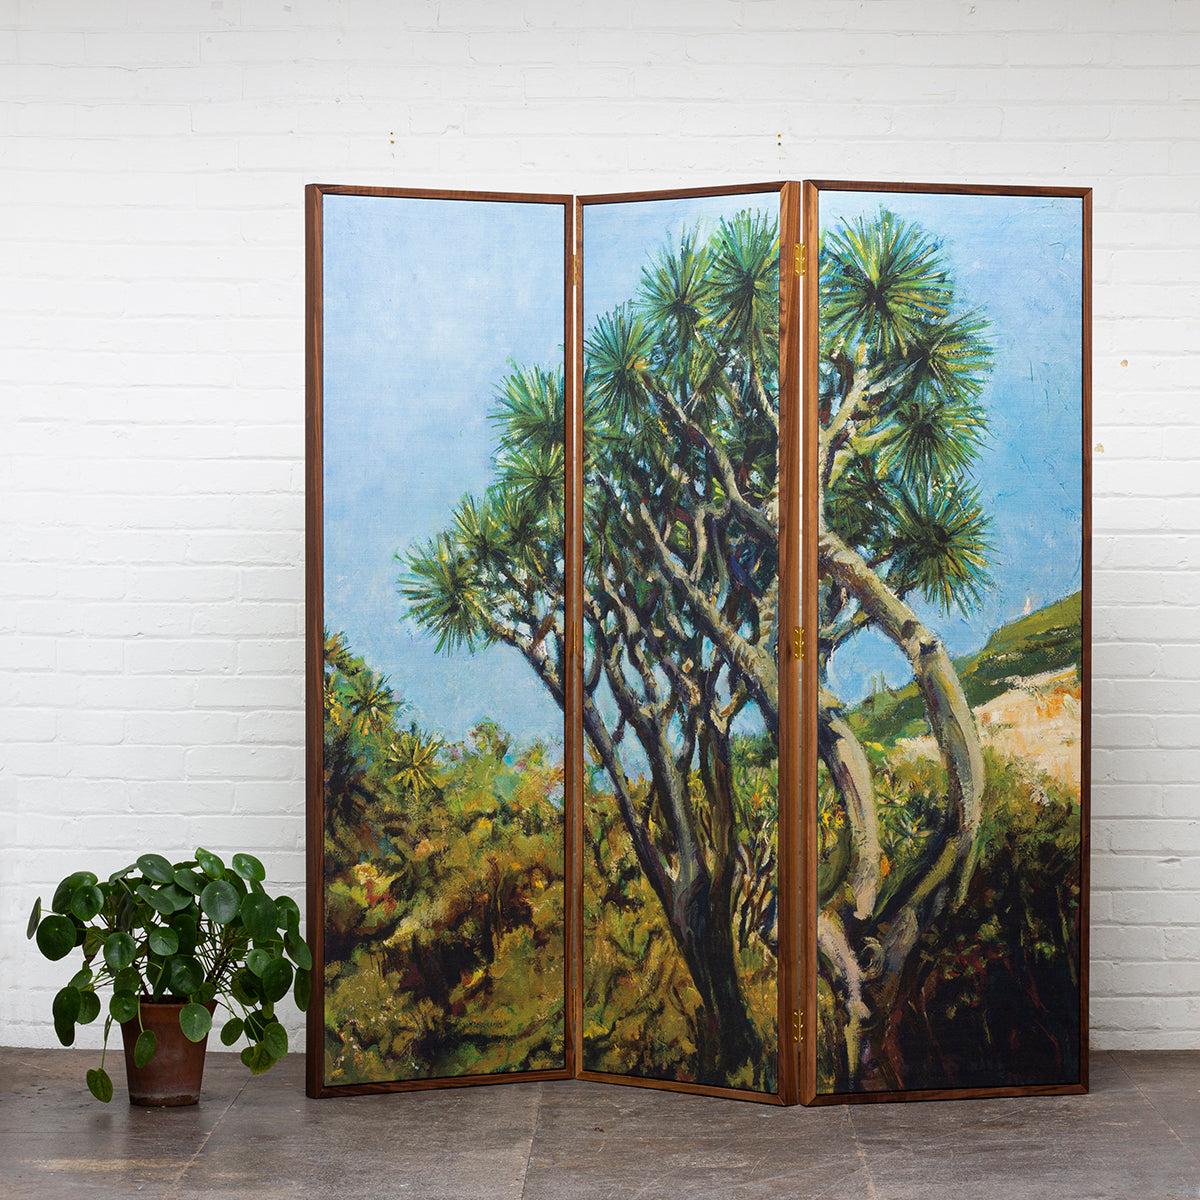 Luxury screen, choose a walnut or oak frame. Simple, functional and elegant, The Floating Screen is a premier design unique. It features original oil on canvas artworks, digitally printed onto locally woven linen. Each screen is handmade in the UK